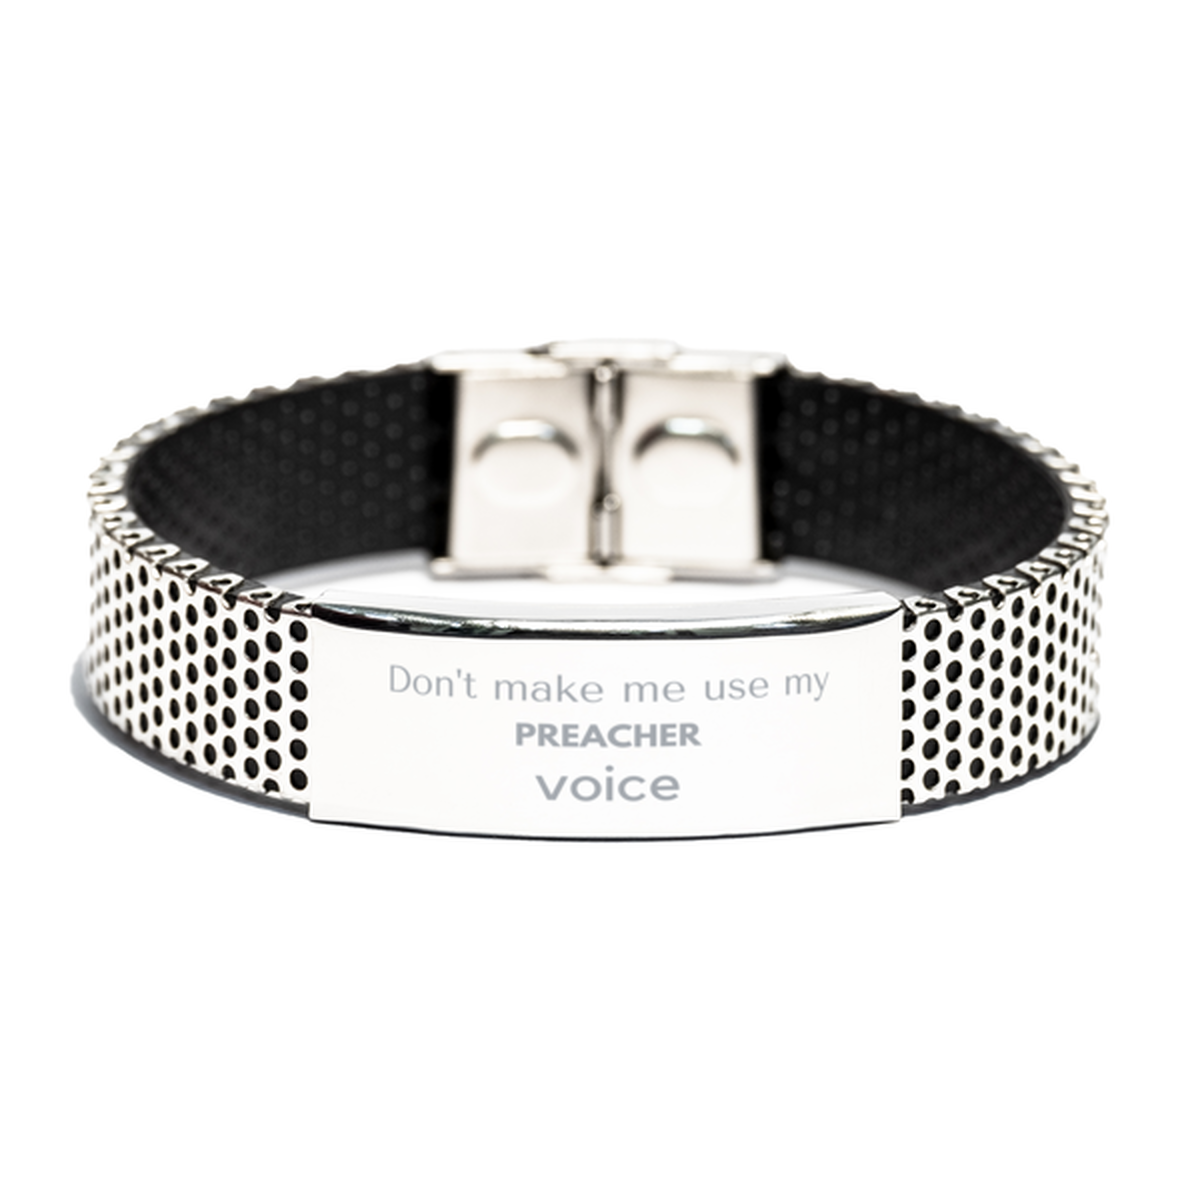 Don't make me use my Preacher voice, Sarcasm Preacher Gifts, Christmas Preacher Stainless Steel Bracelet Birthday Unique Gifts For Preacher Coworkers, Men, Women, Colleague, Friends